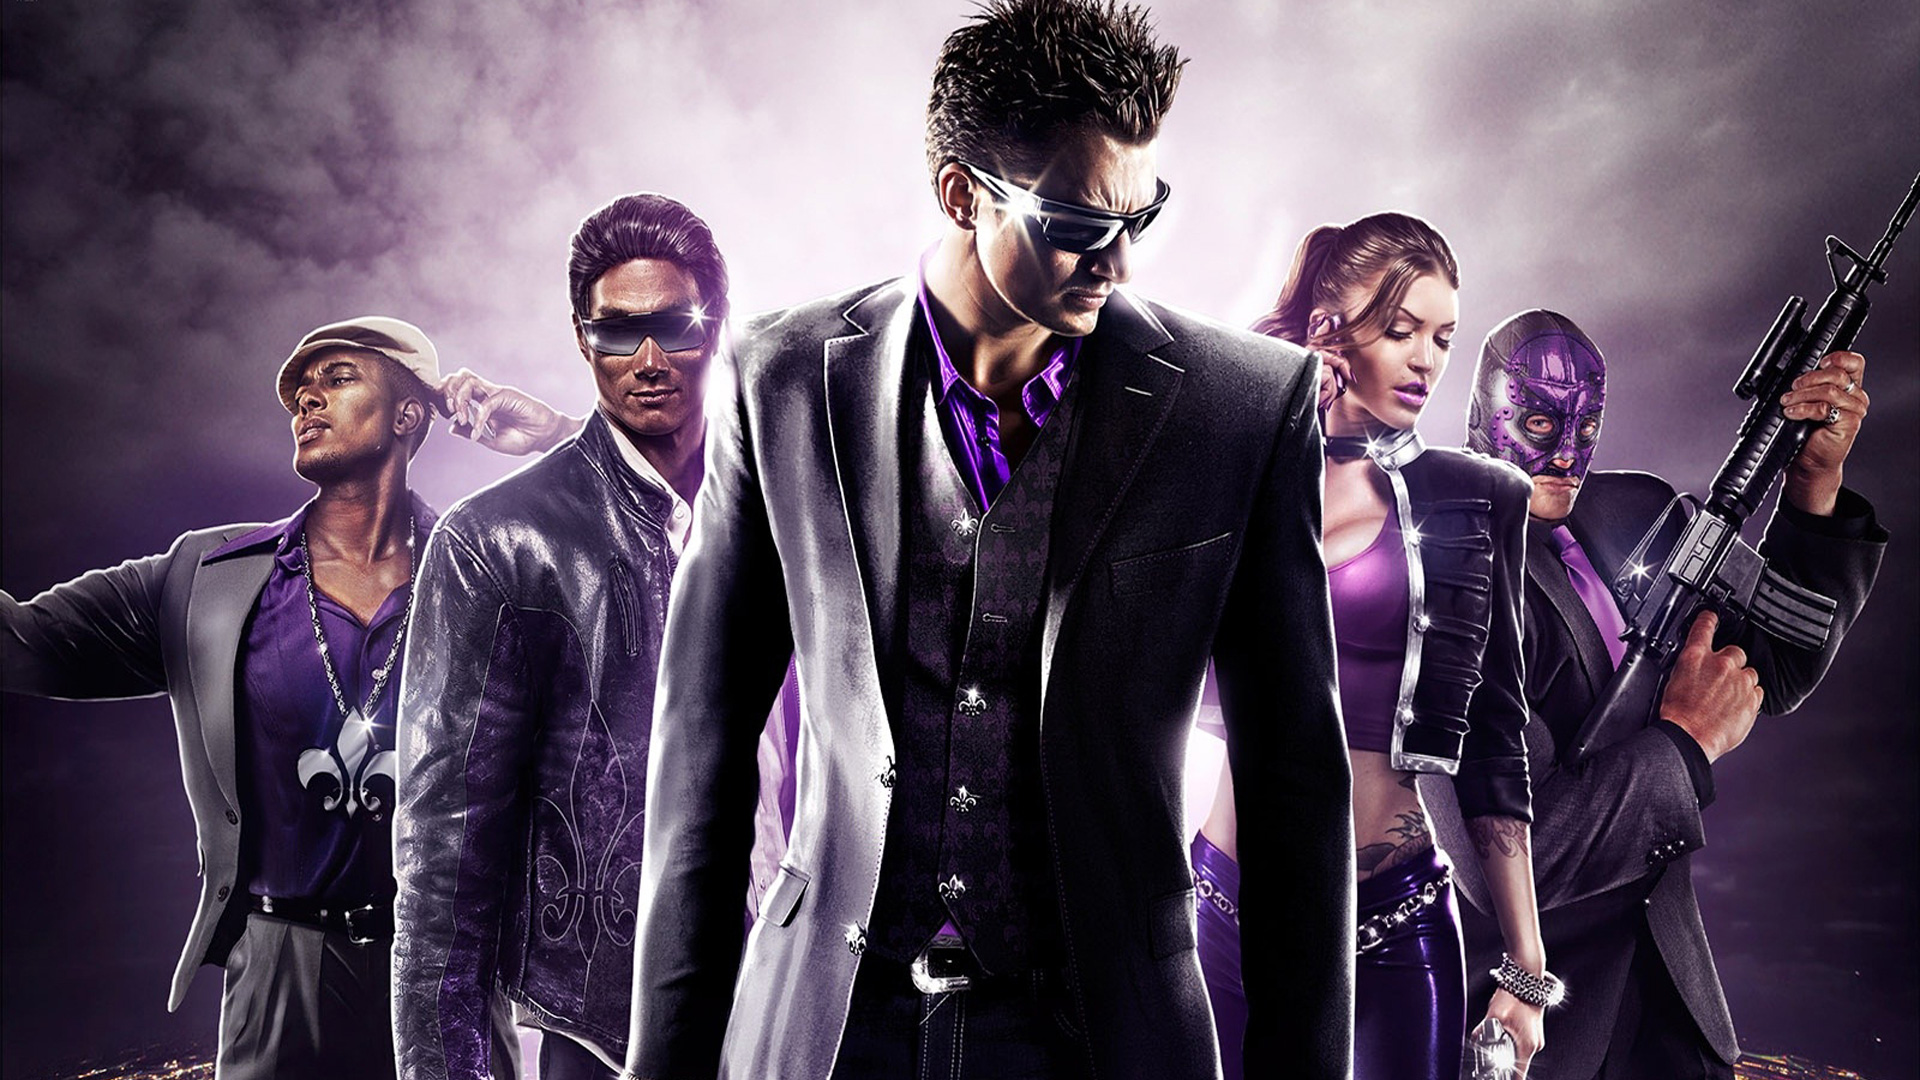 Saints Row The Third Wallpaper In